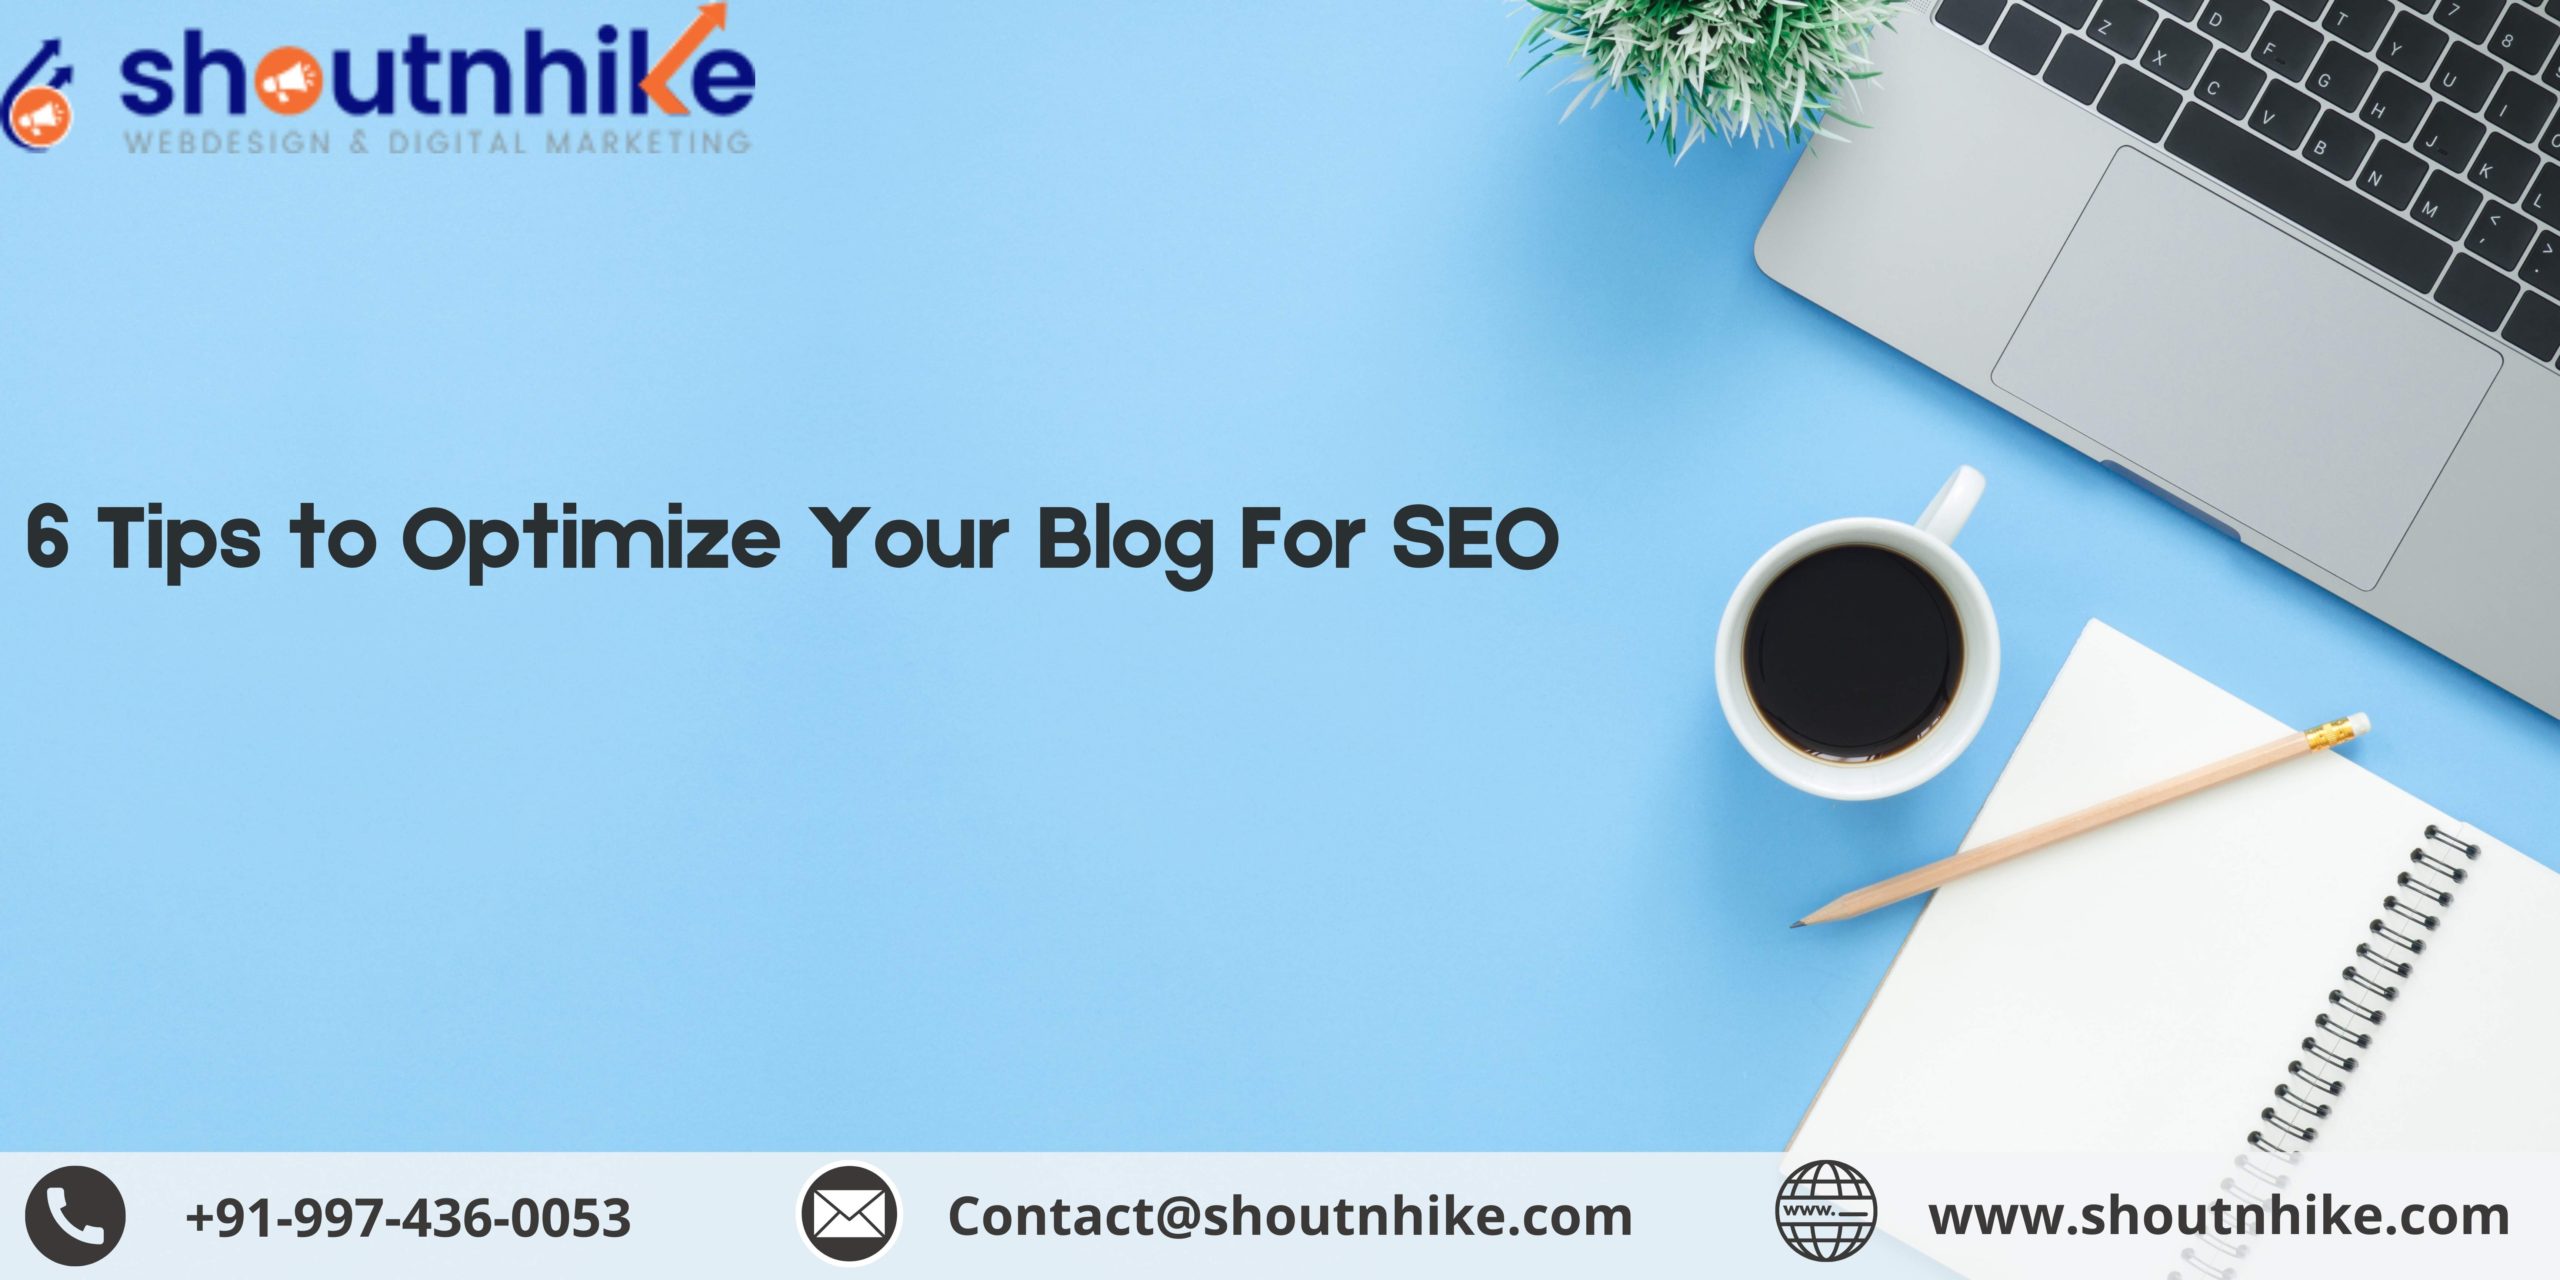 6 Tips to Optimize Your Blog For SEO